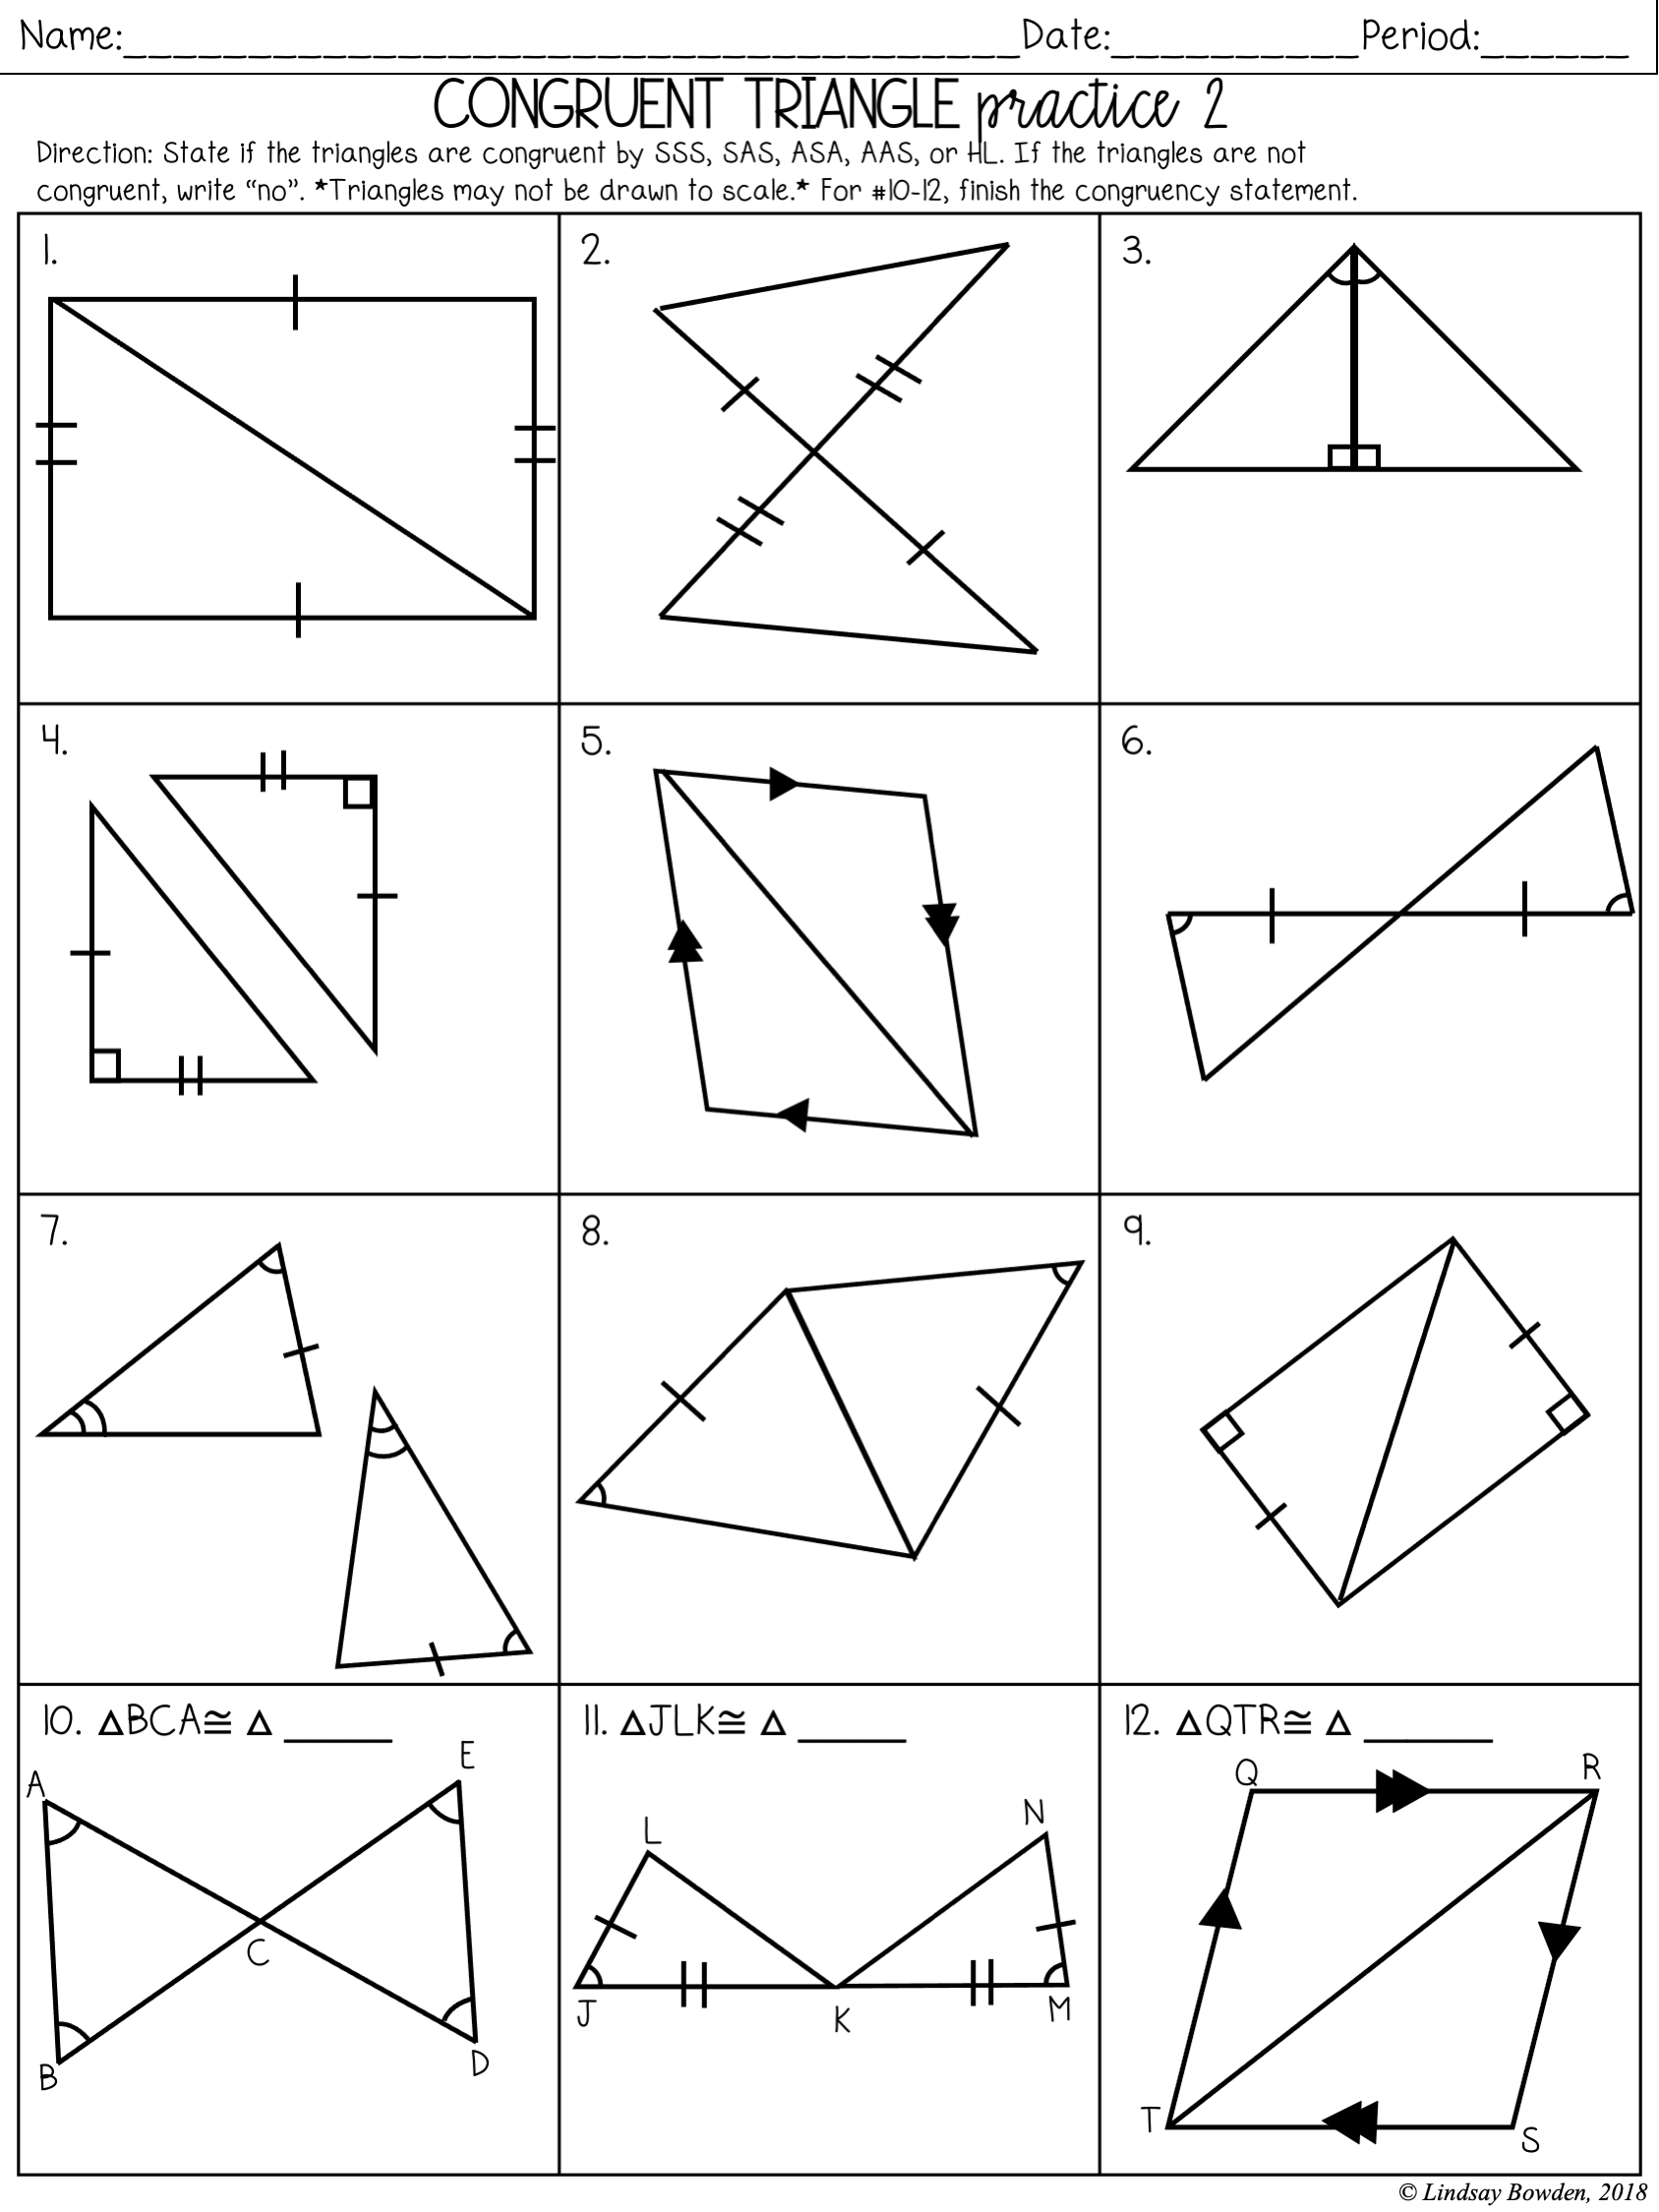 Congruent Triangles Notes and Worksheets - Lindsay Bowden Inside Triangle Congruence Worksheet Answers